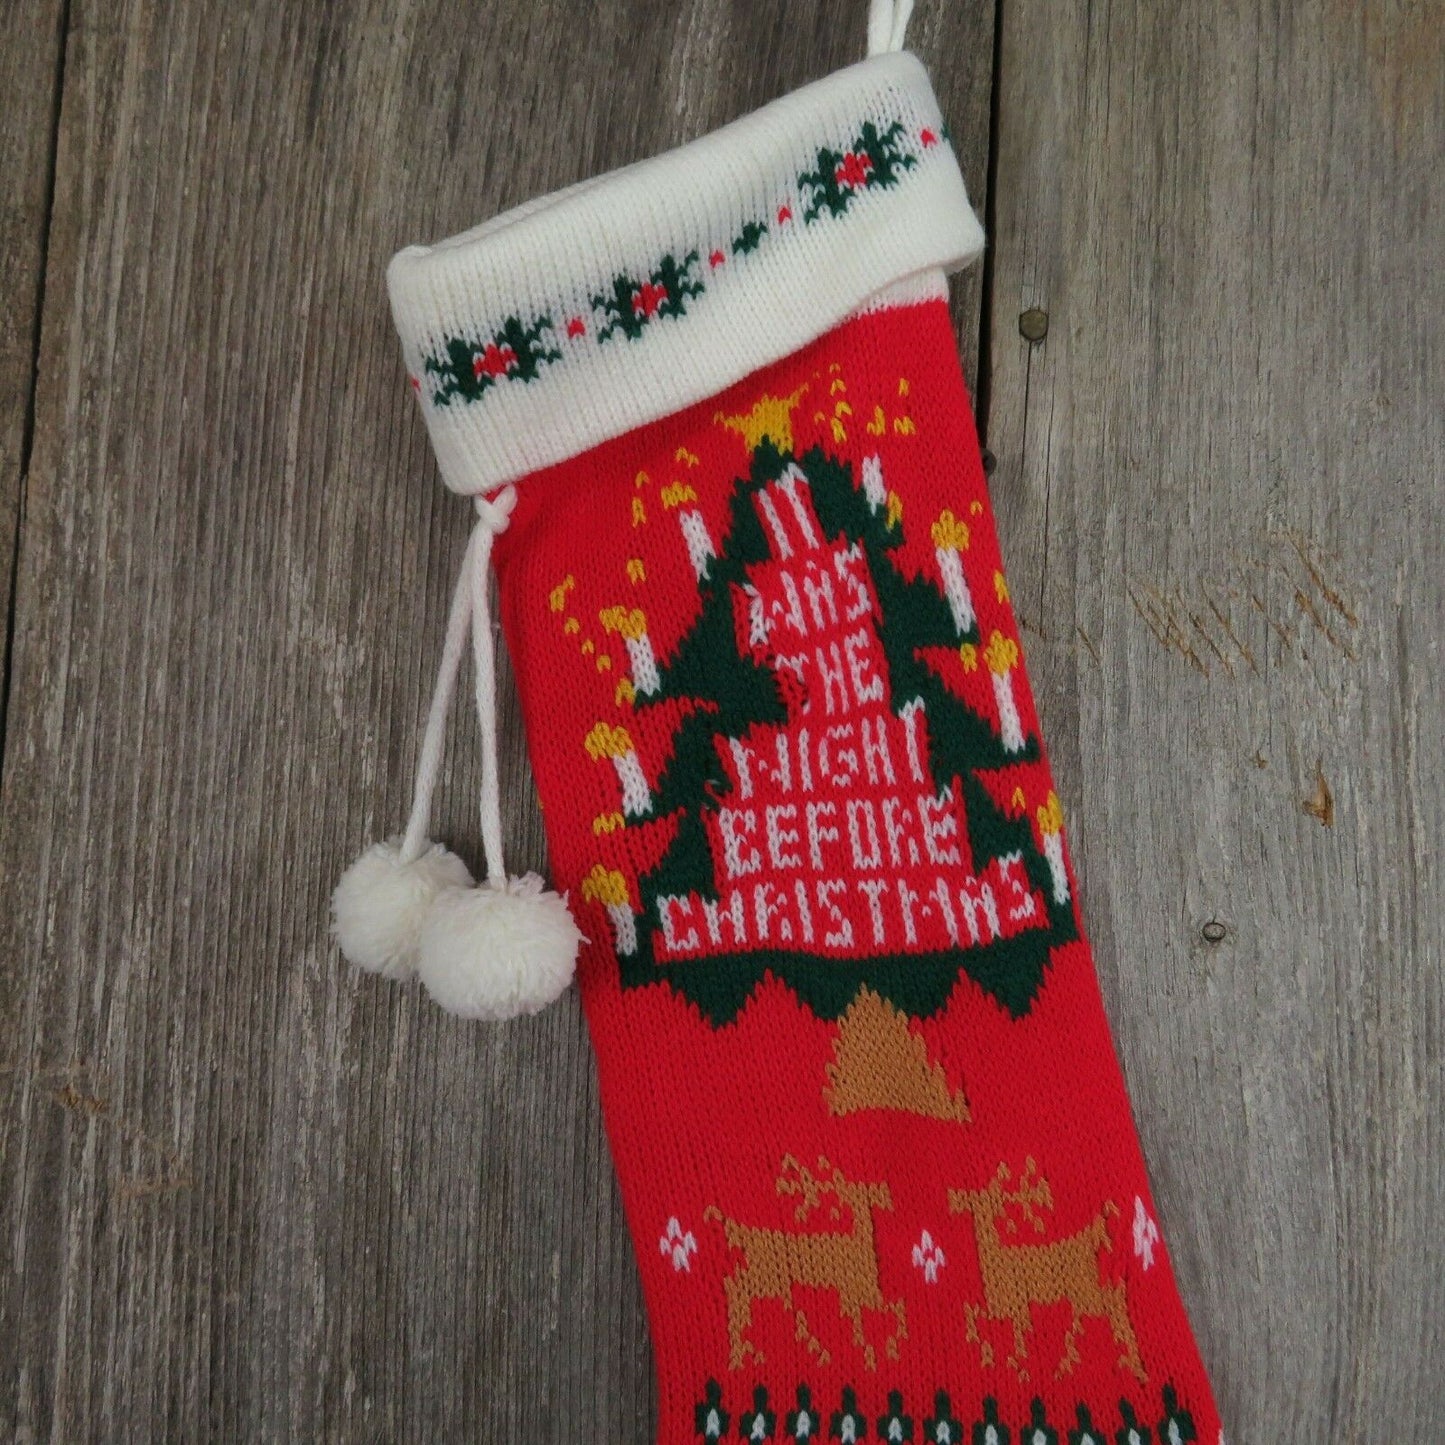 Vintage Stocking Knitted Knit Night Before Christmas Tree Reindeer Red White - At Grandma's Table